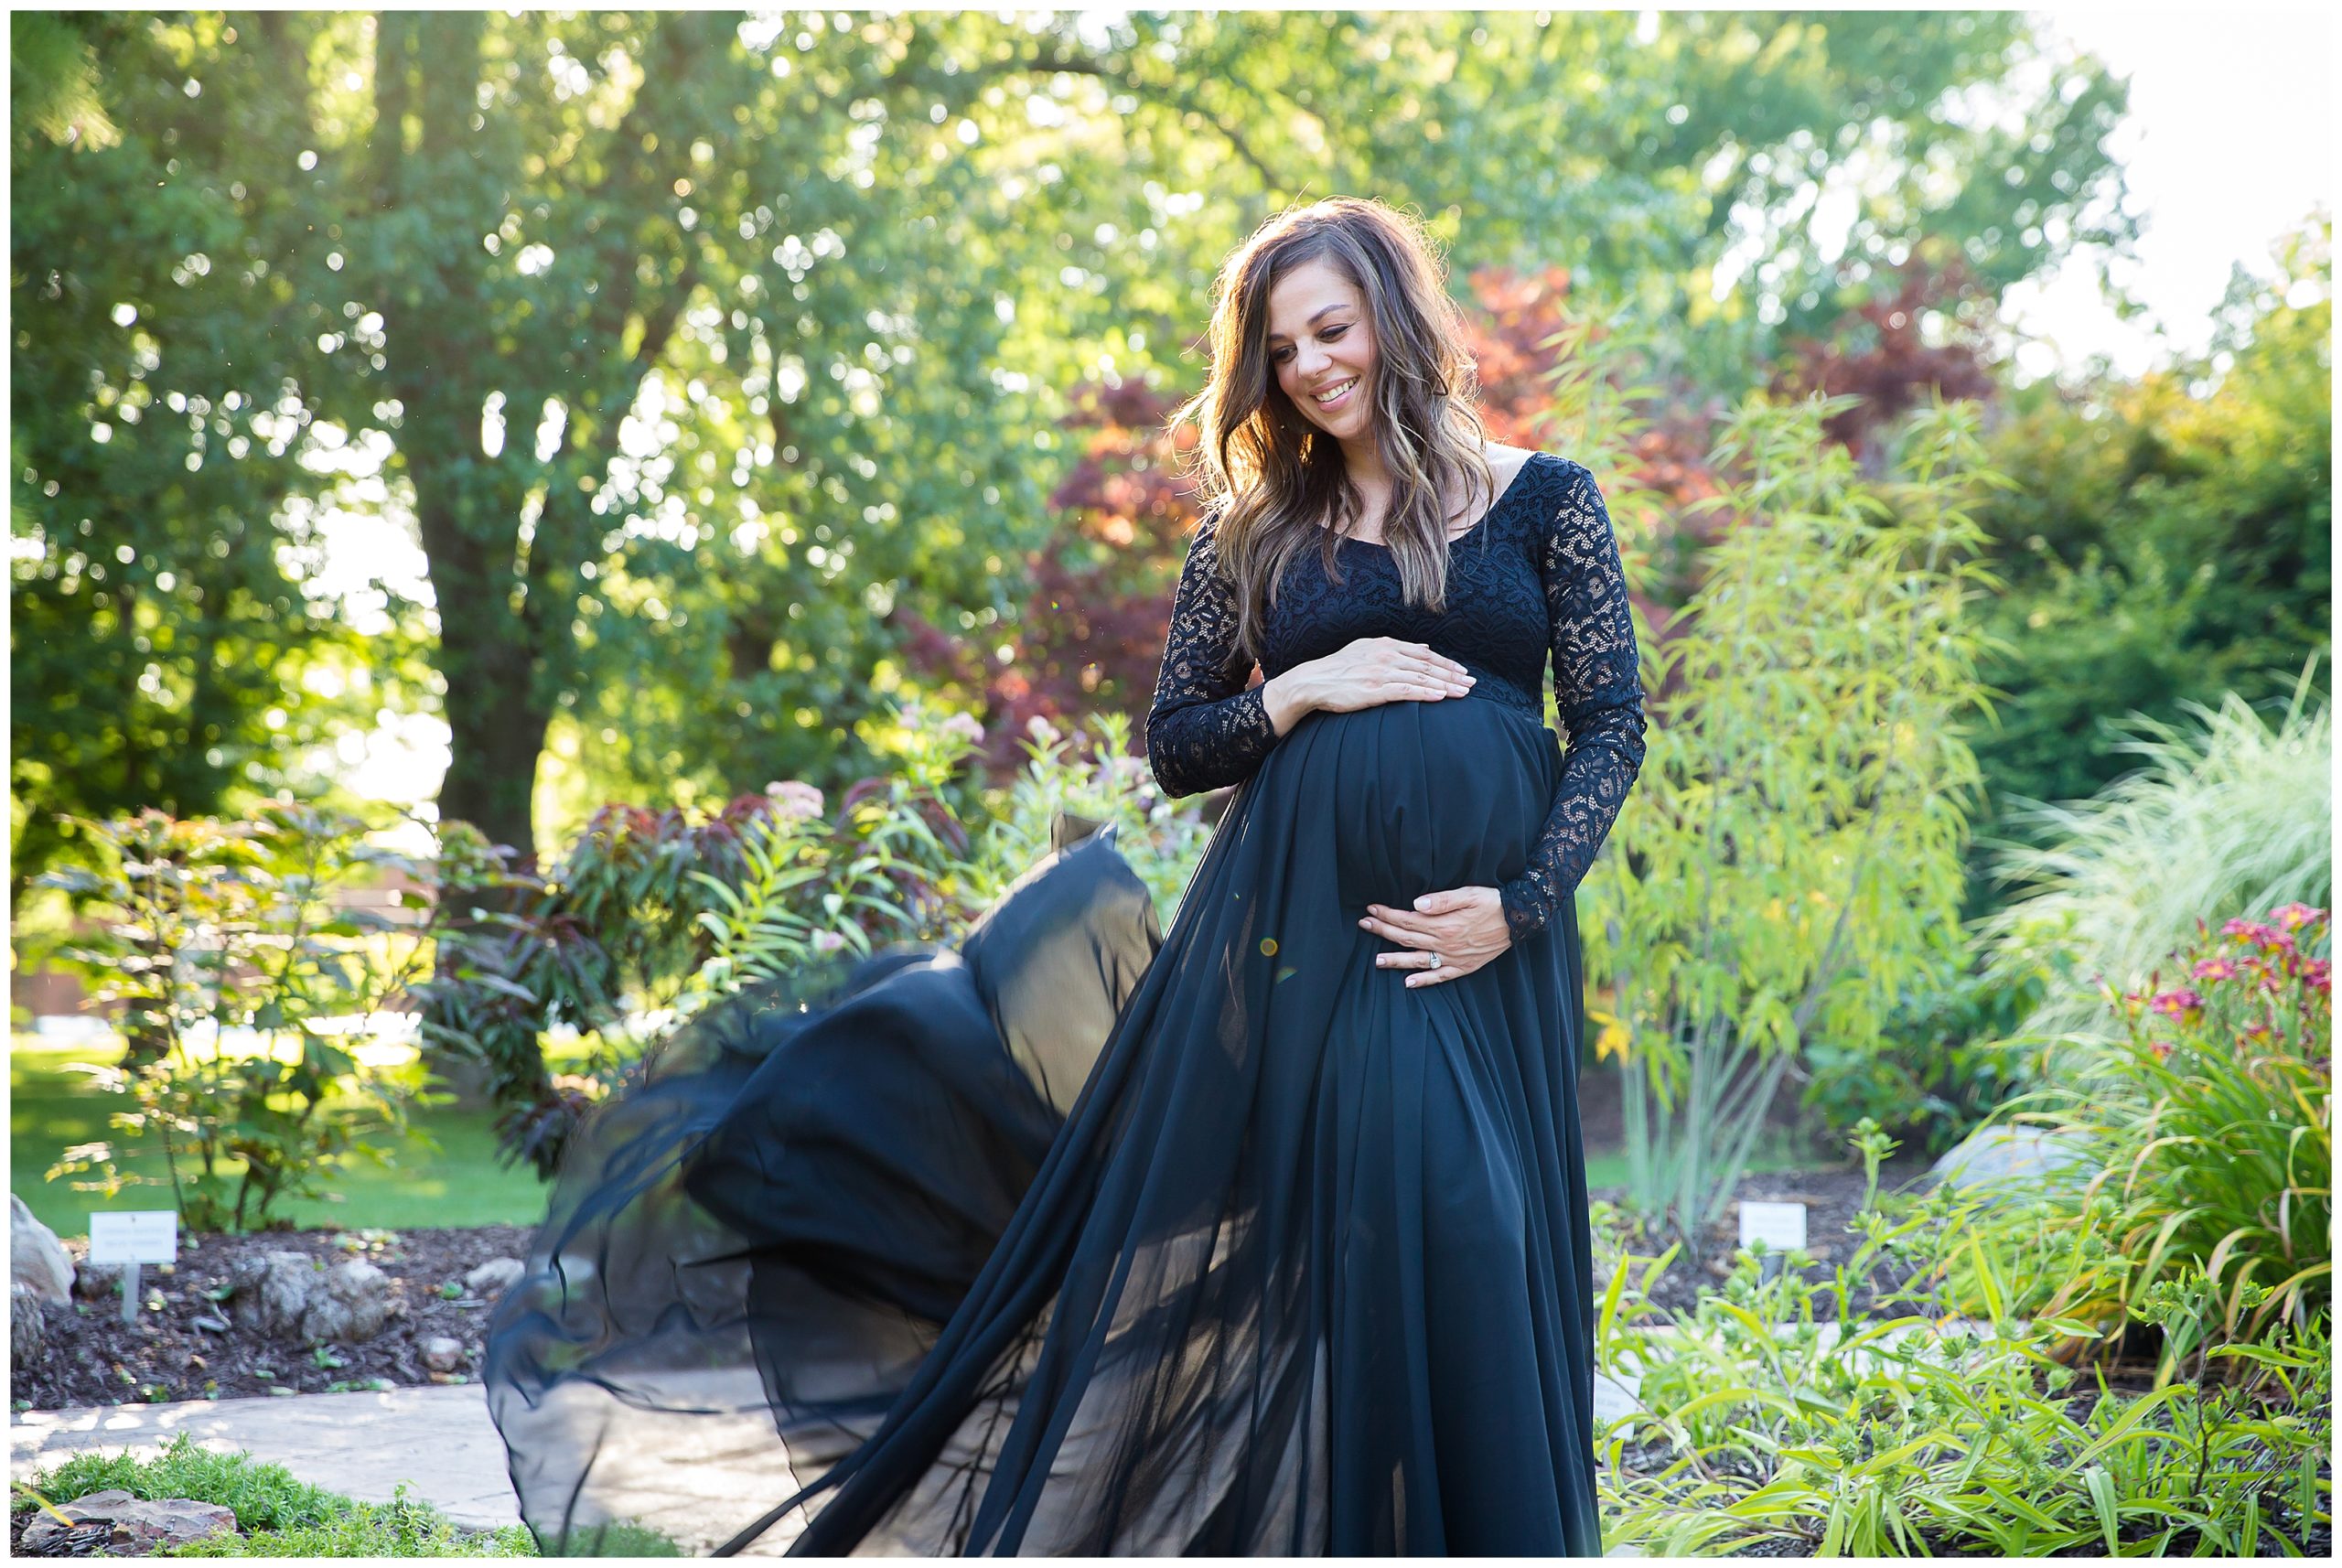 Shelter gardens maternity photo session by Bella Faith Photography